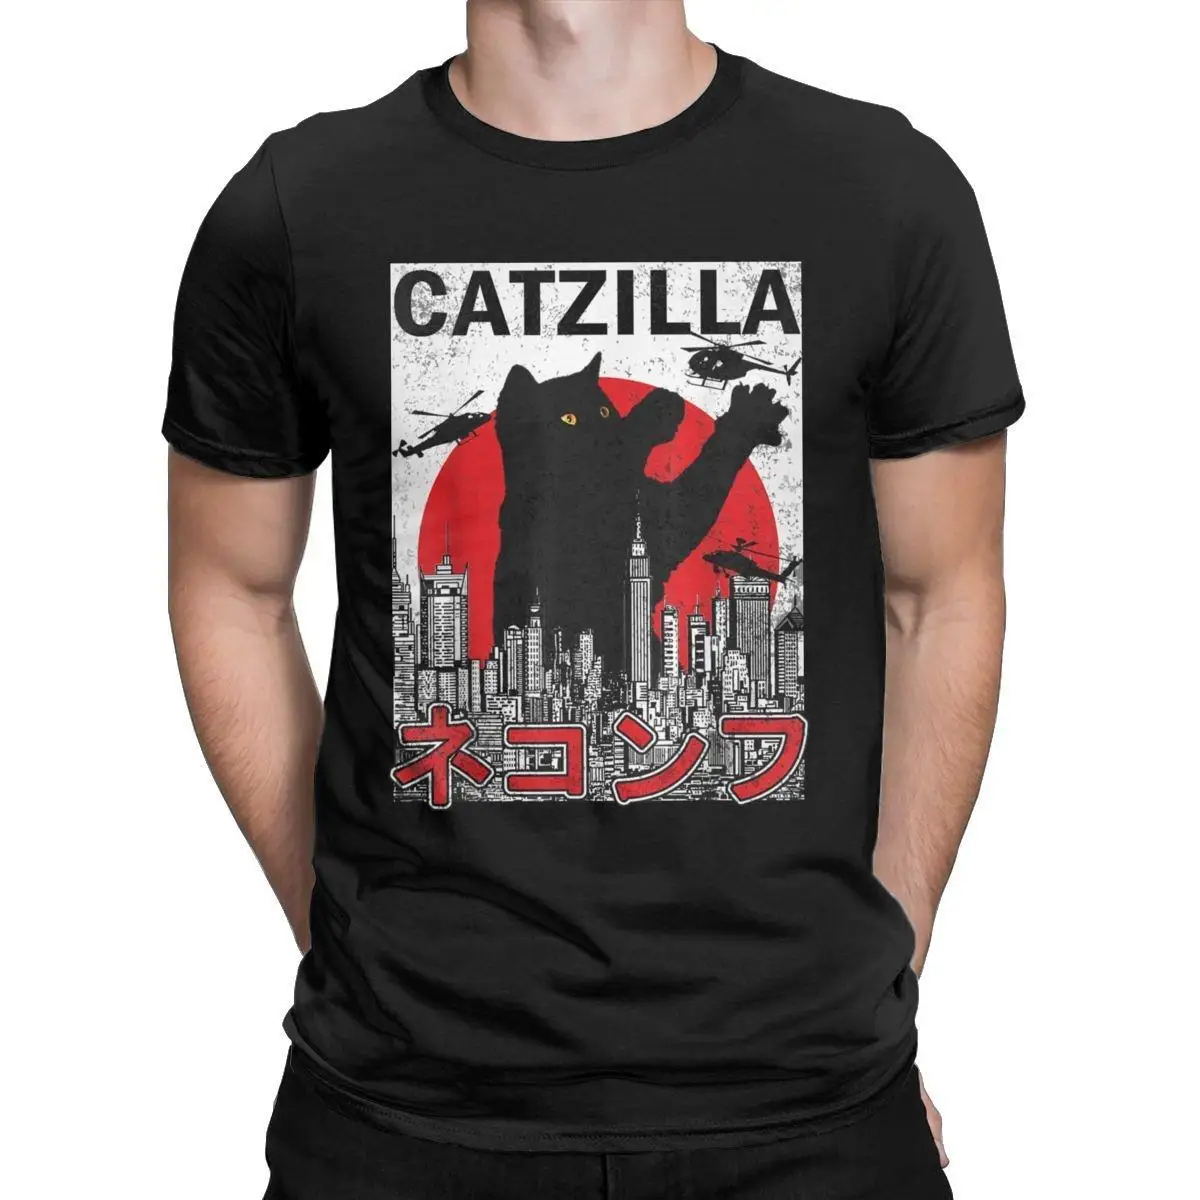 

Crazy Catzilla Japanese Cat Kitten Lover T-Shirts for Men Round Collar Cotton T Shirts Short Sleeve Tees Gift Idea Clothes